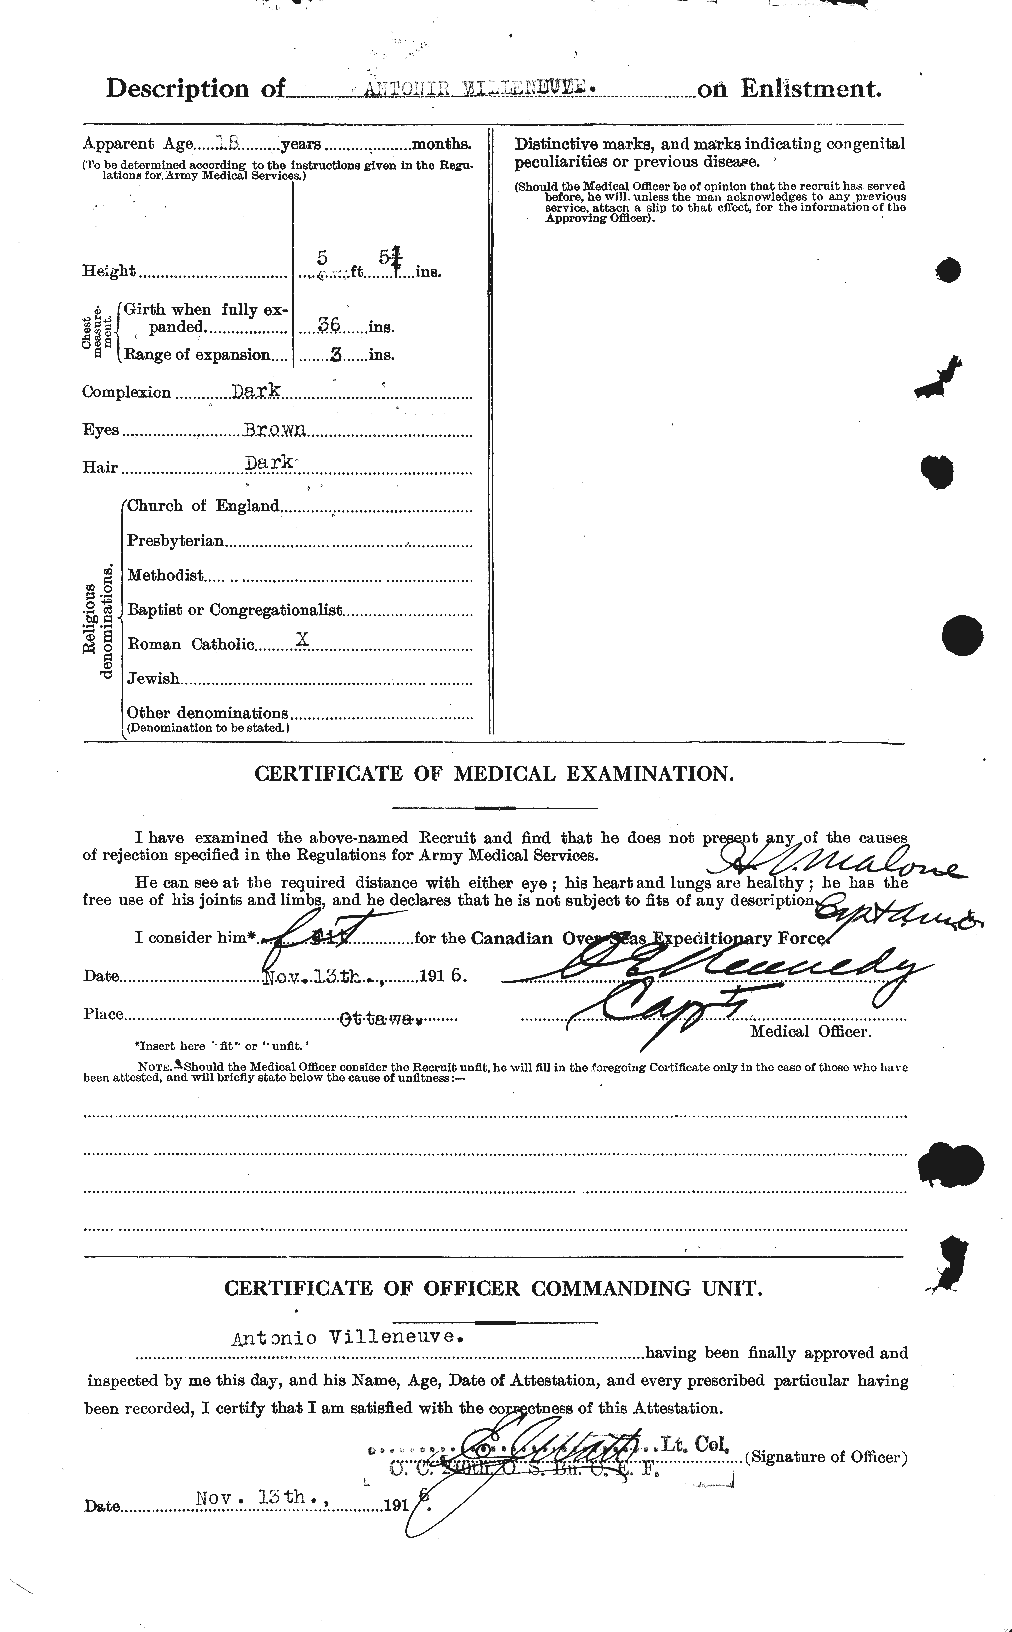 Personnel Records of the First World War - CEF 653790b